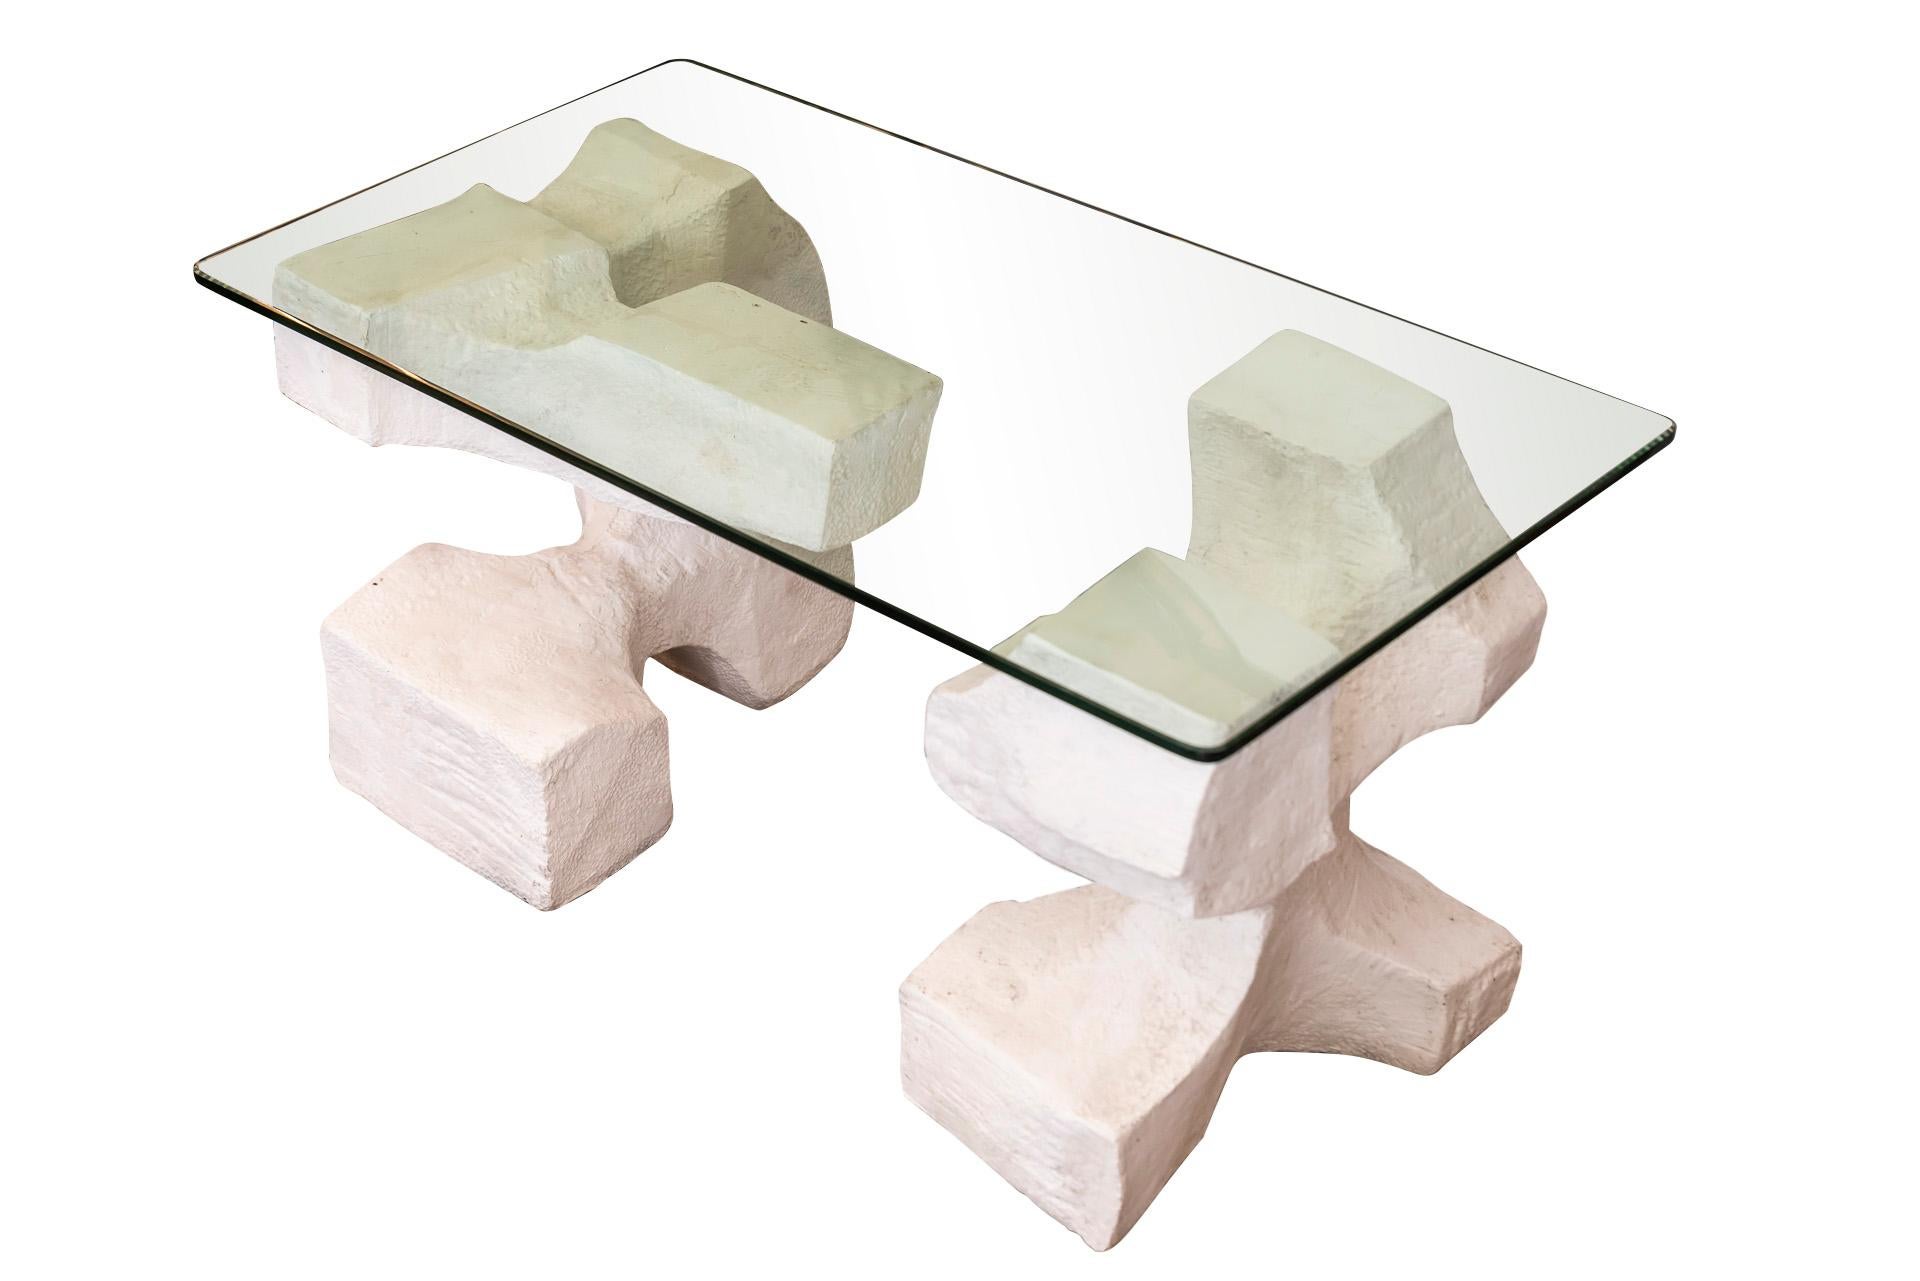 Coffee table made from two sculptures,
Glass tabletop and chipped stone, 
Cubic-shaped base,
France, circa 1970.

Measures: Width 90 cm, depth 48 cm, height 45 cm.